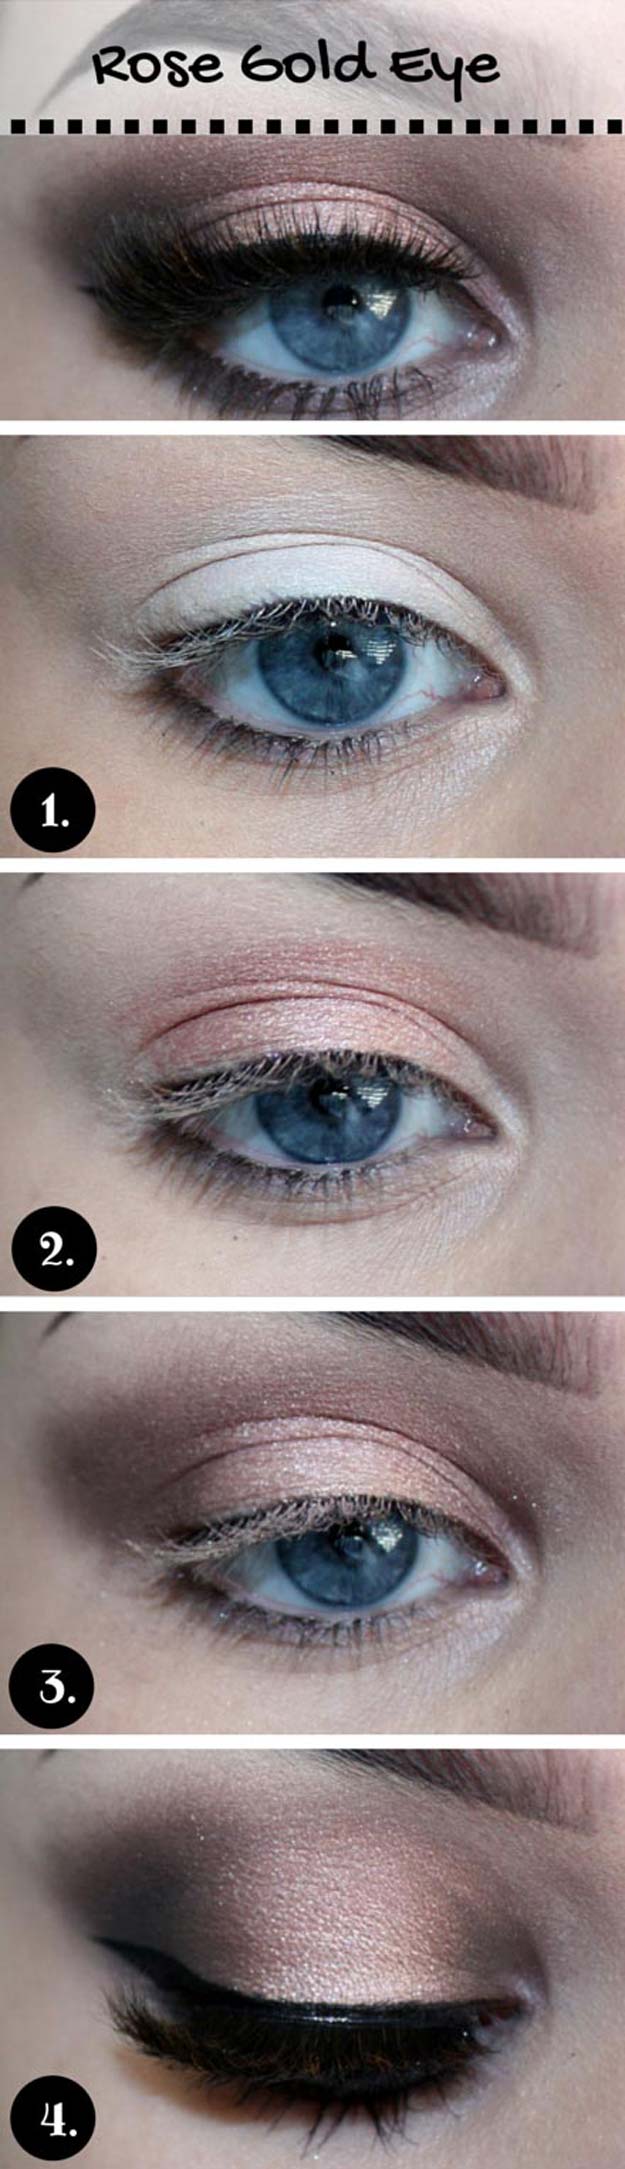 Best Eyeshadow Tutorials - Rosegold Makeup Look - Easy Step by Step How To For Eye Shadow - Cool Makeup Tricks and Eye Makeup Tutorial With Instructions - Quick Ways to Do Smoky Eye, Natural Makeup, Looks for Day and Evening, Brown and Blue Eyes - Cool Ideas for Beginners and Teens 